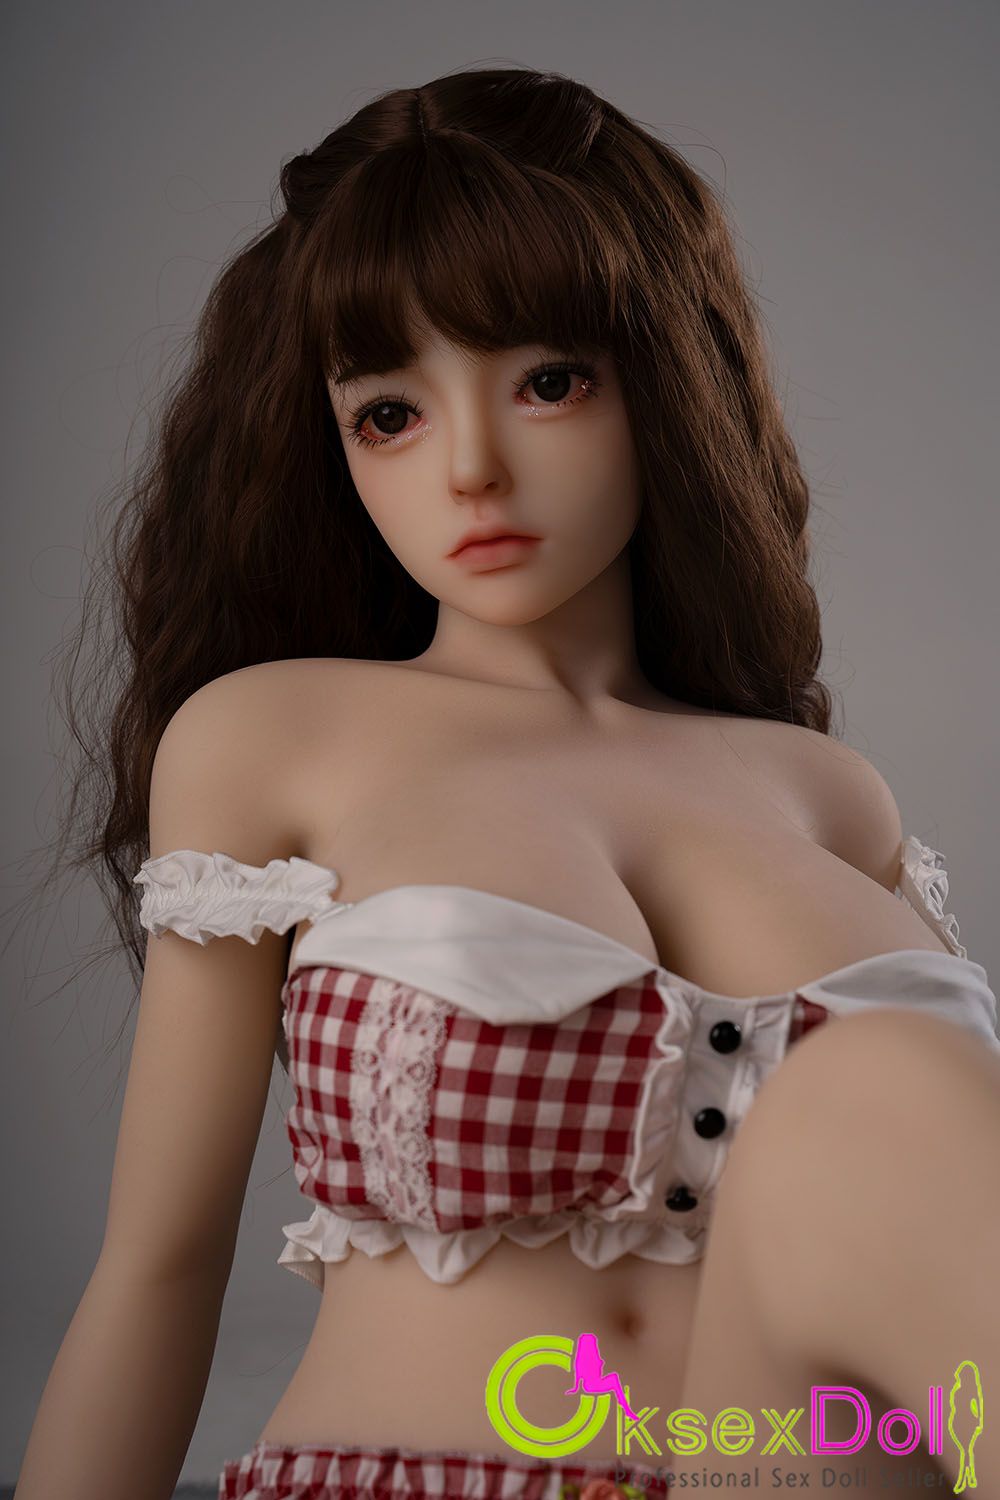 AXB doll Images